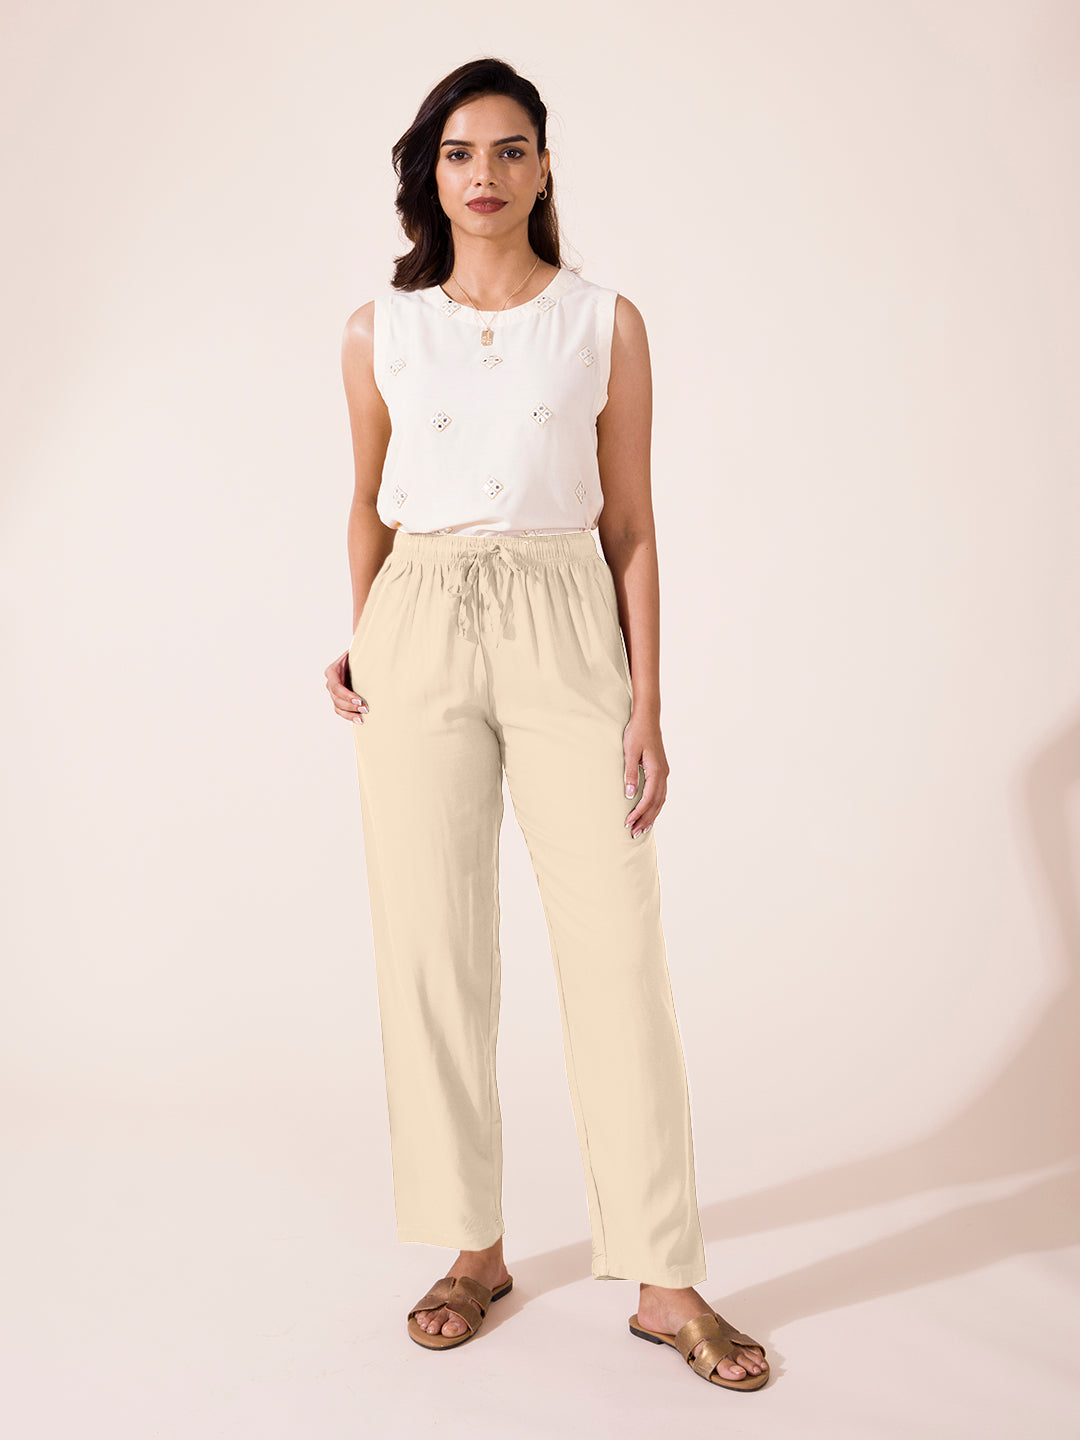 Womens Formal Pants Ribbed High Waisted Suit Pants Business Casual Straight  Leg Slim Fitted Solid Color Trousers 